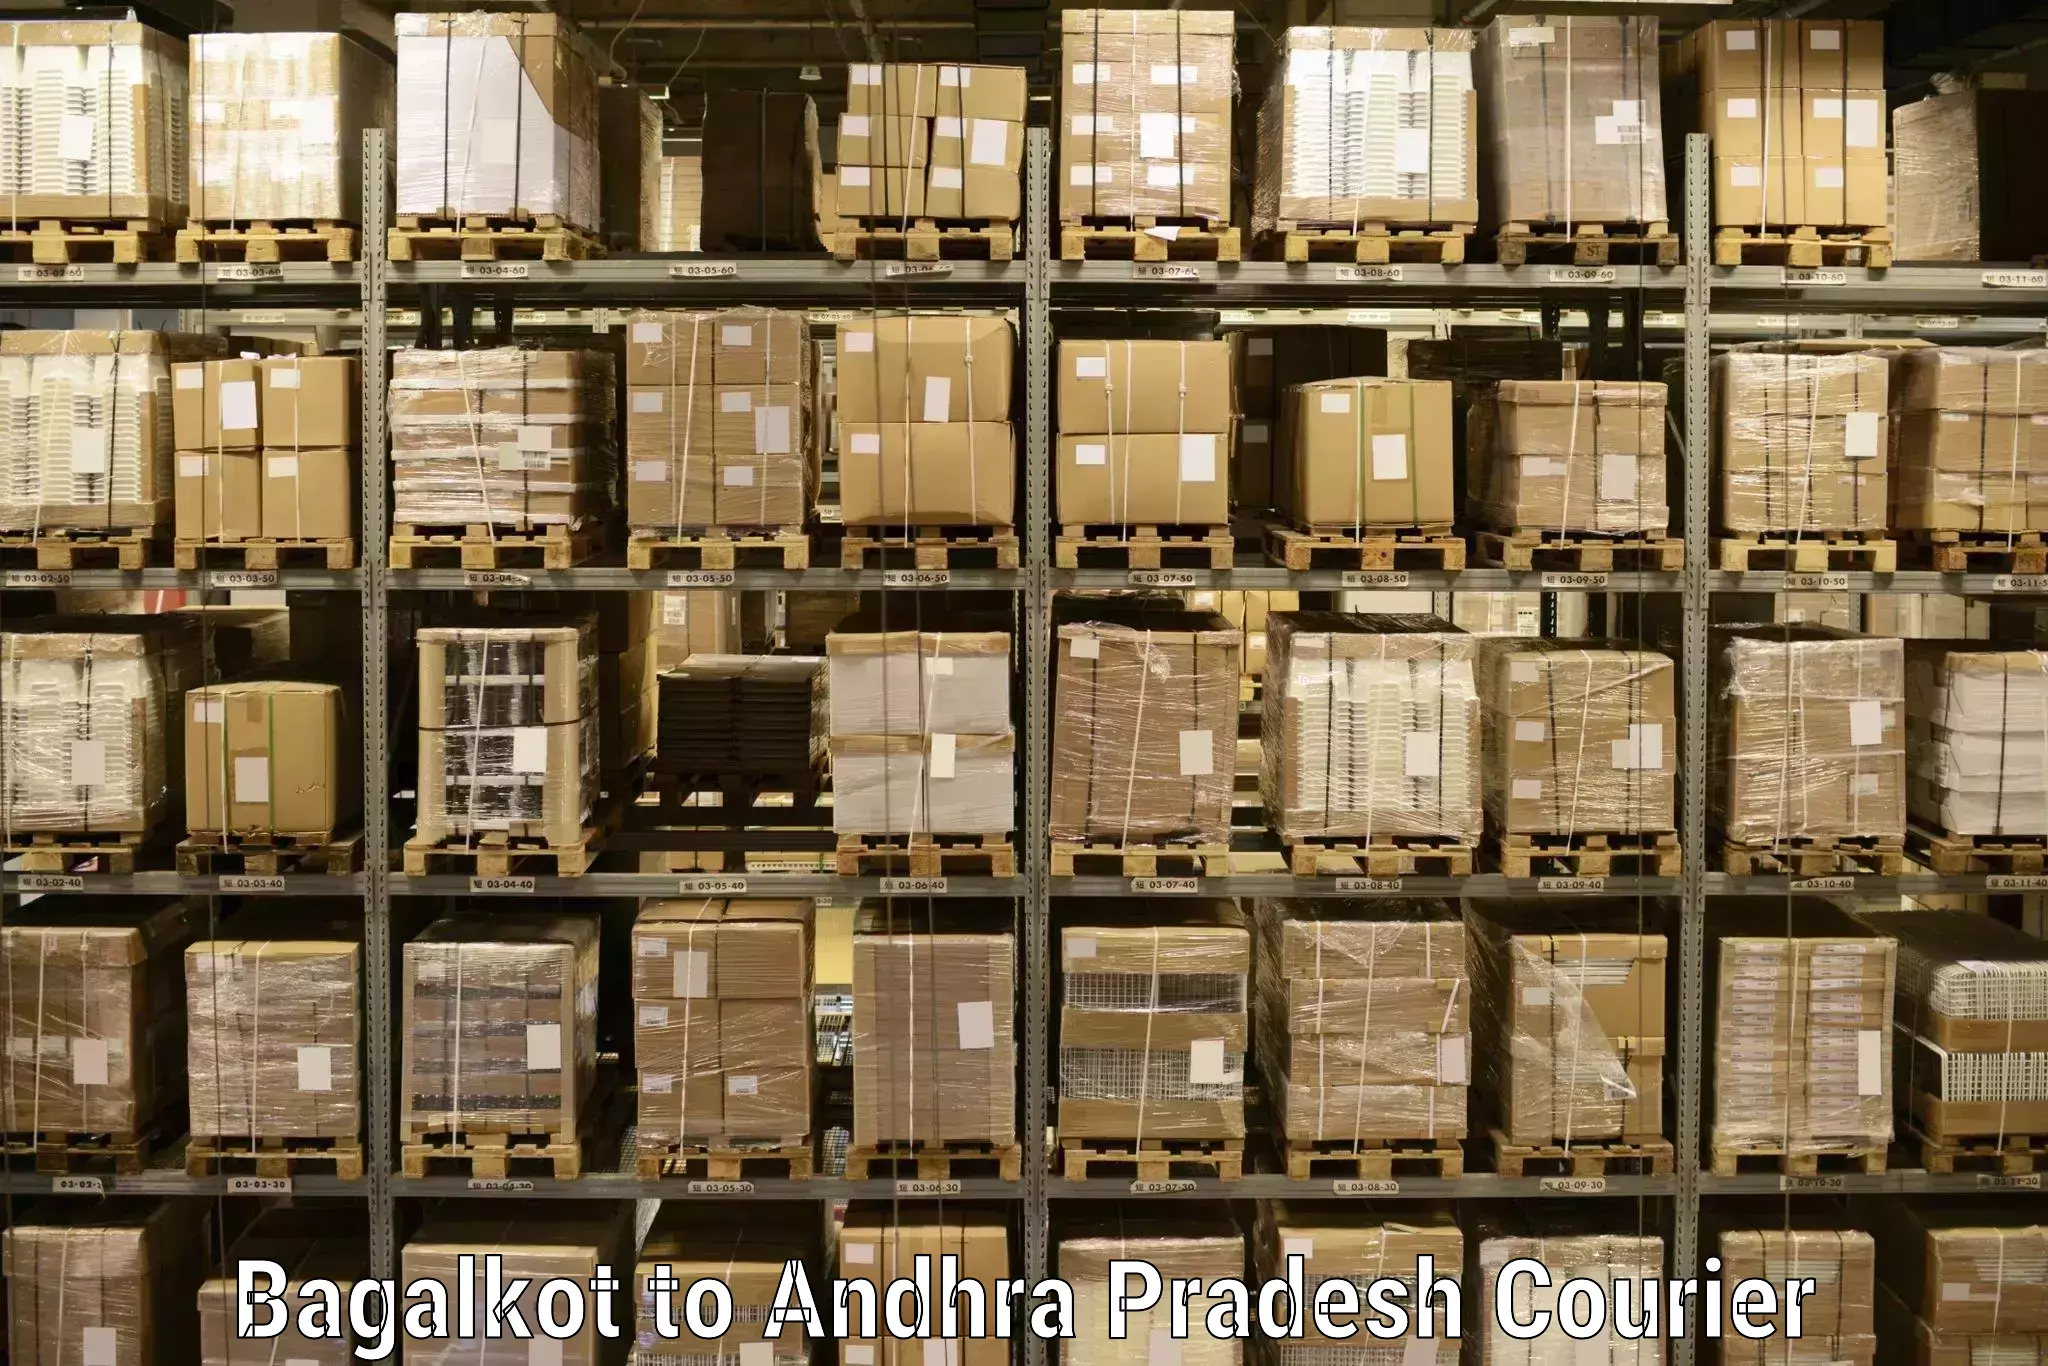 Next-generation courier services Bagalkot to Velgodu